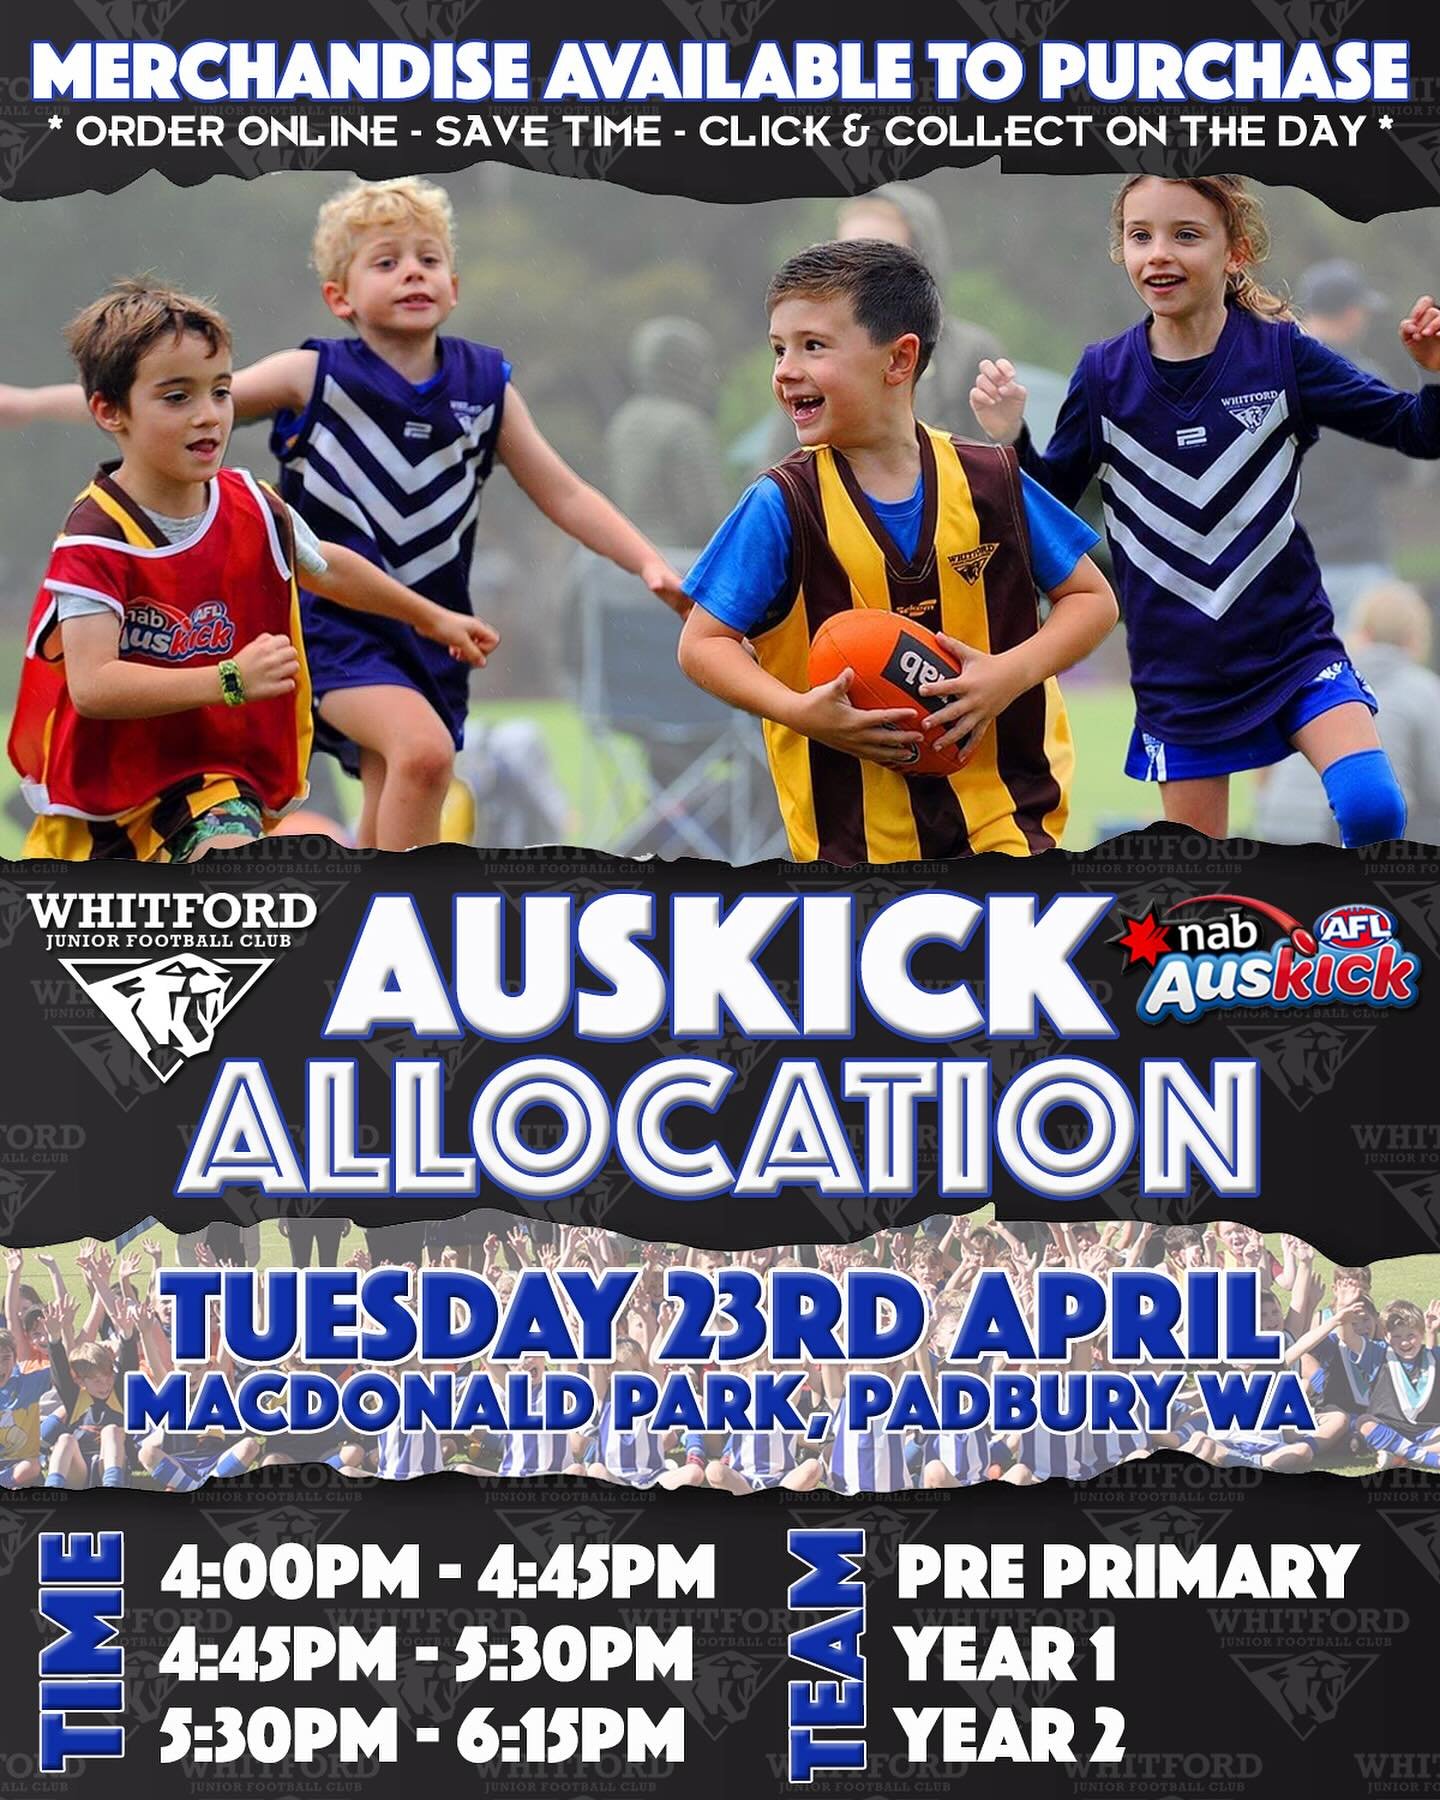 We are letting all of our @aflauskick players and parents know that Allocation Day is this coming Tuesday from 4:00pm at our MacDonald Park Clubrooms.

*4:00pm - Pre Primary
*4:45pm - Year 1
*5:30pm - Year 2

The Merch Store will be open from 4:00 -5